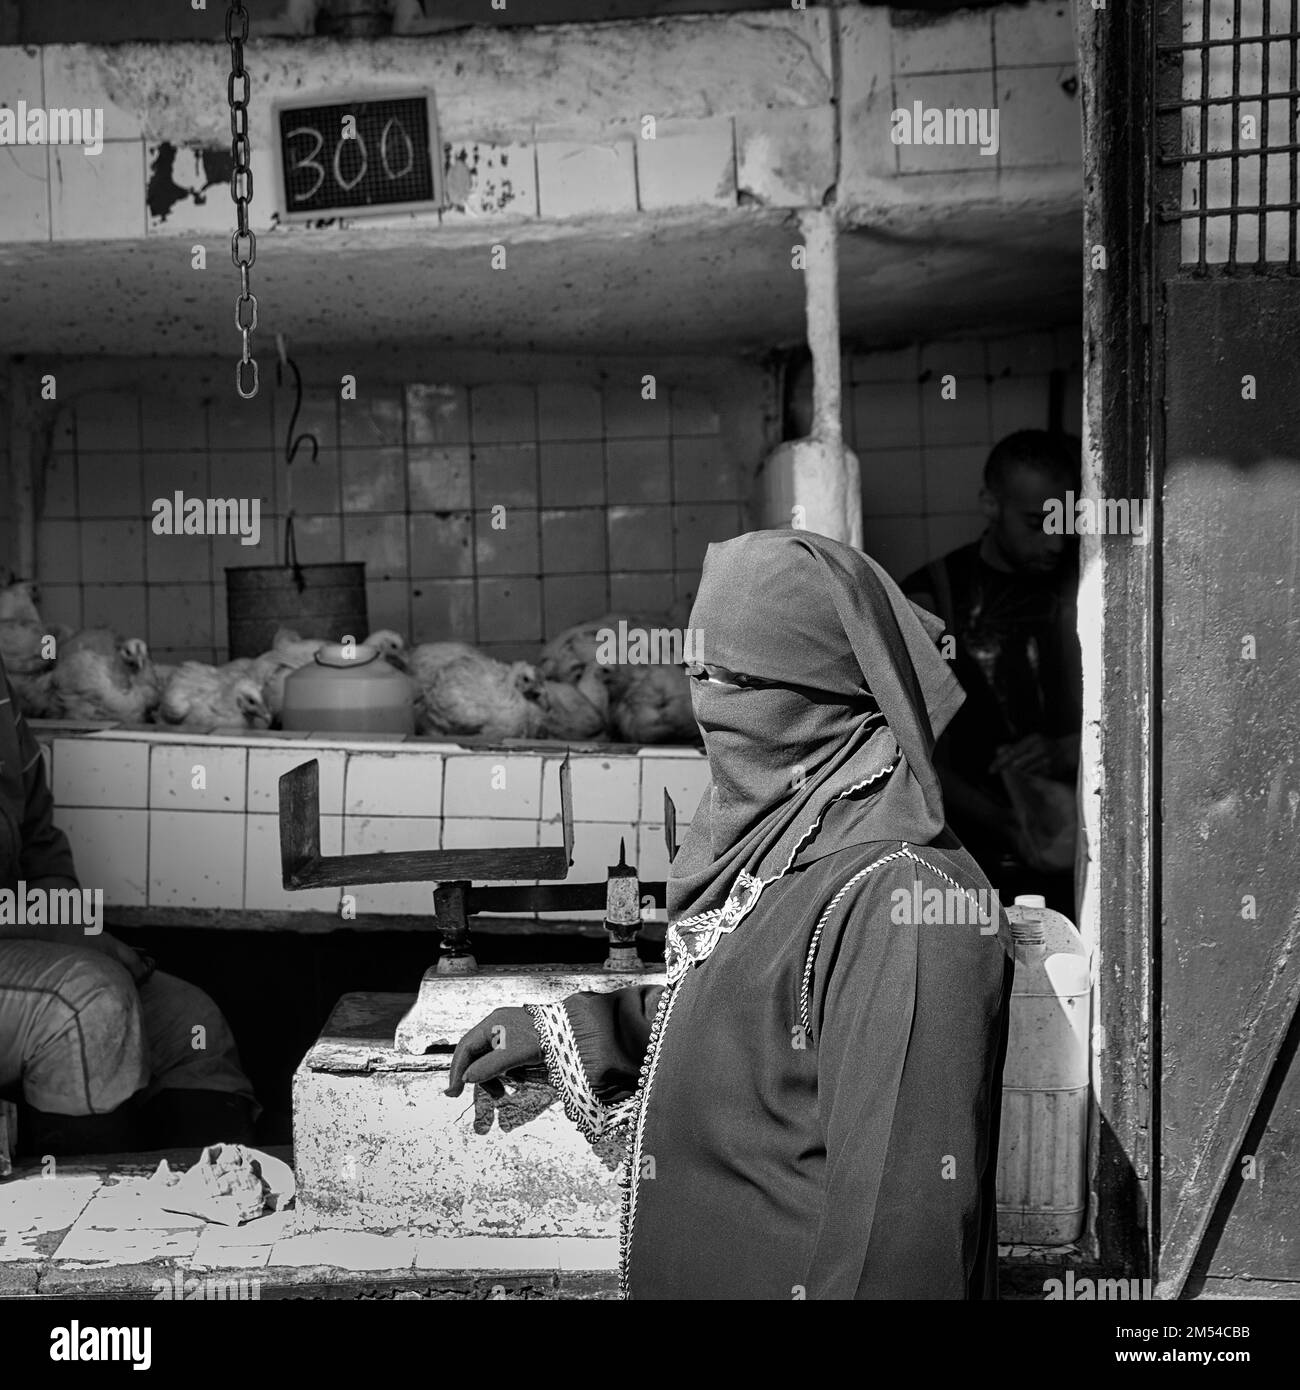 Traditionally dressed Muslim woman with niqab stands at poultry stall, market stall, black and white image, symbolic image, Morocco Stock Photo